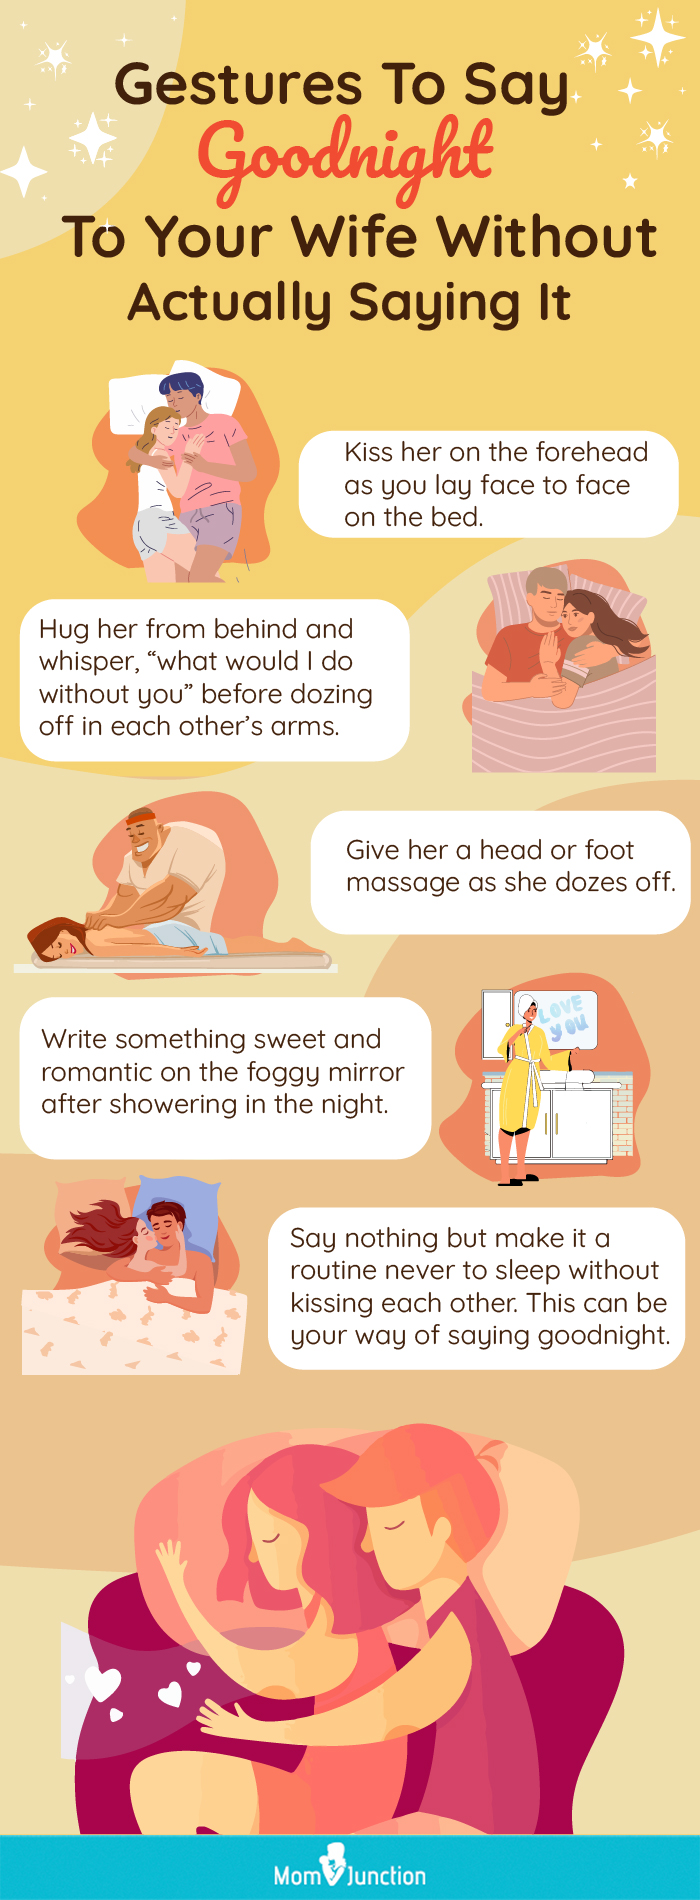 guestures to say goodnight without actuall saying it (infographic)